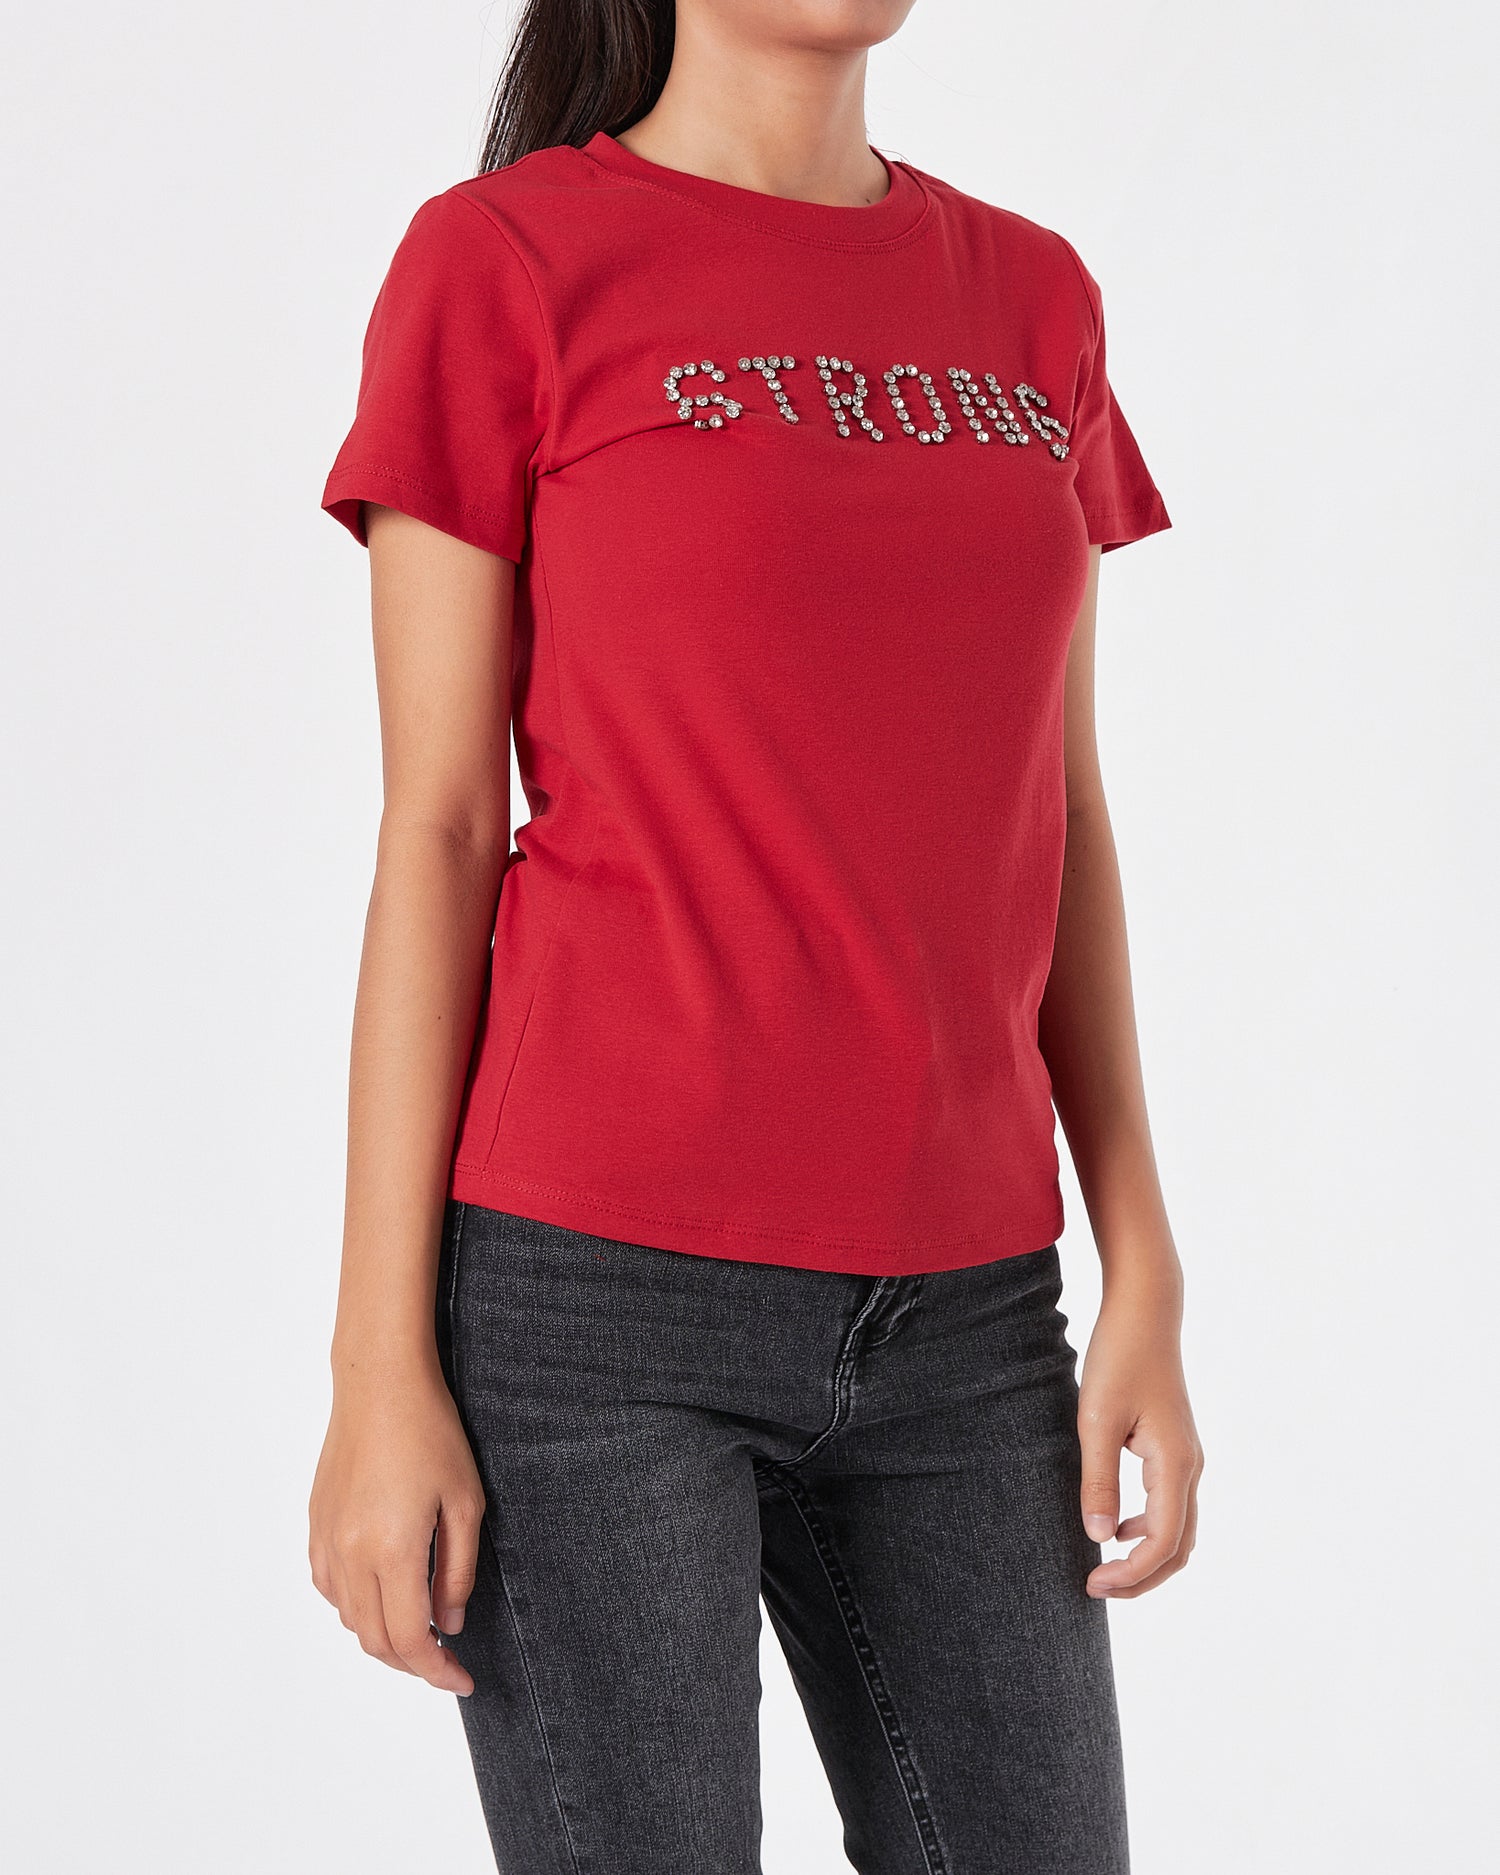 Strong Rhinestone Lady Red T-Shirt 11.90